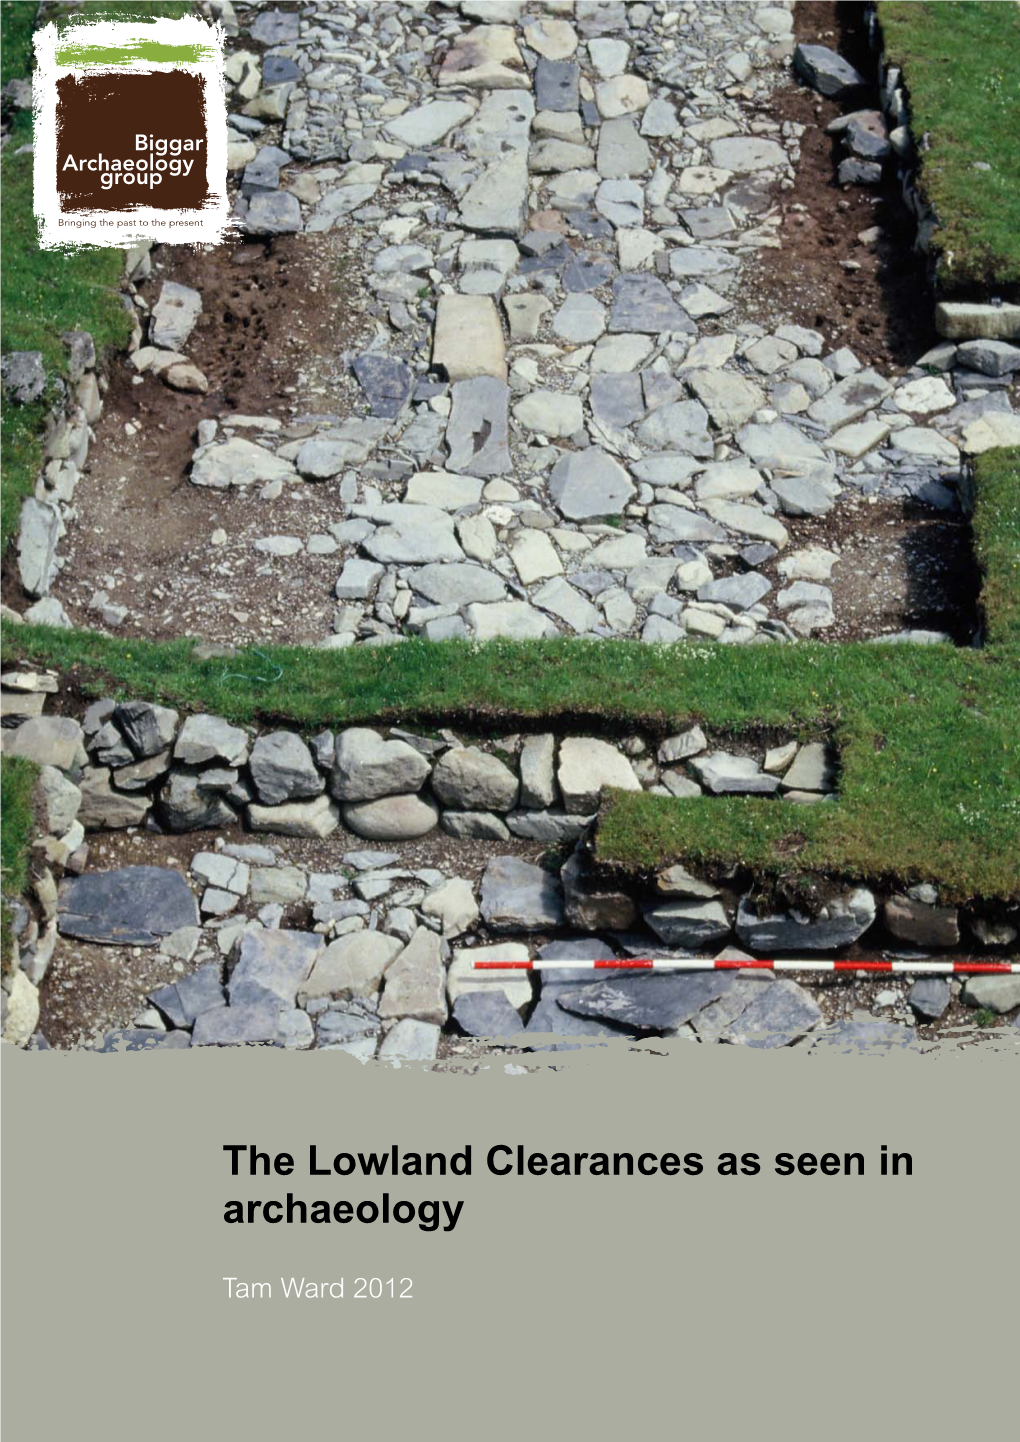 The Lowland Clearances As Seen in Archaeology